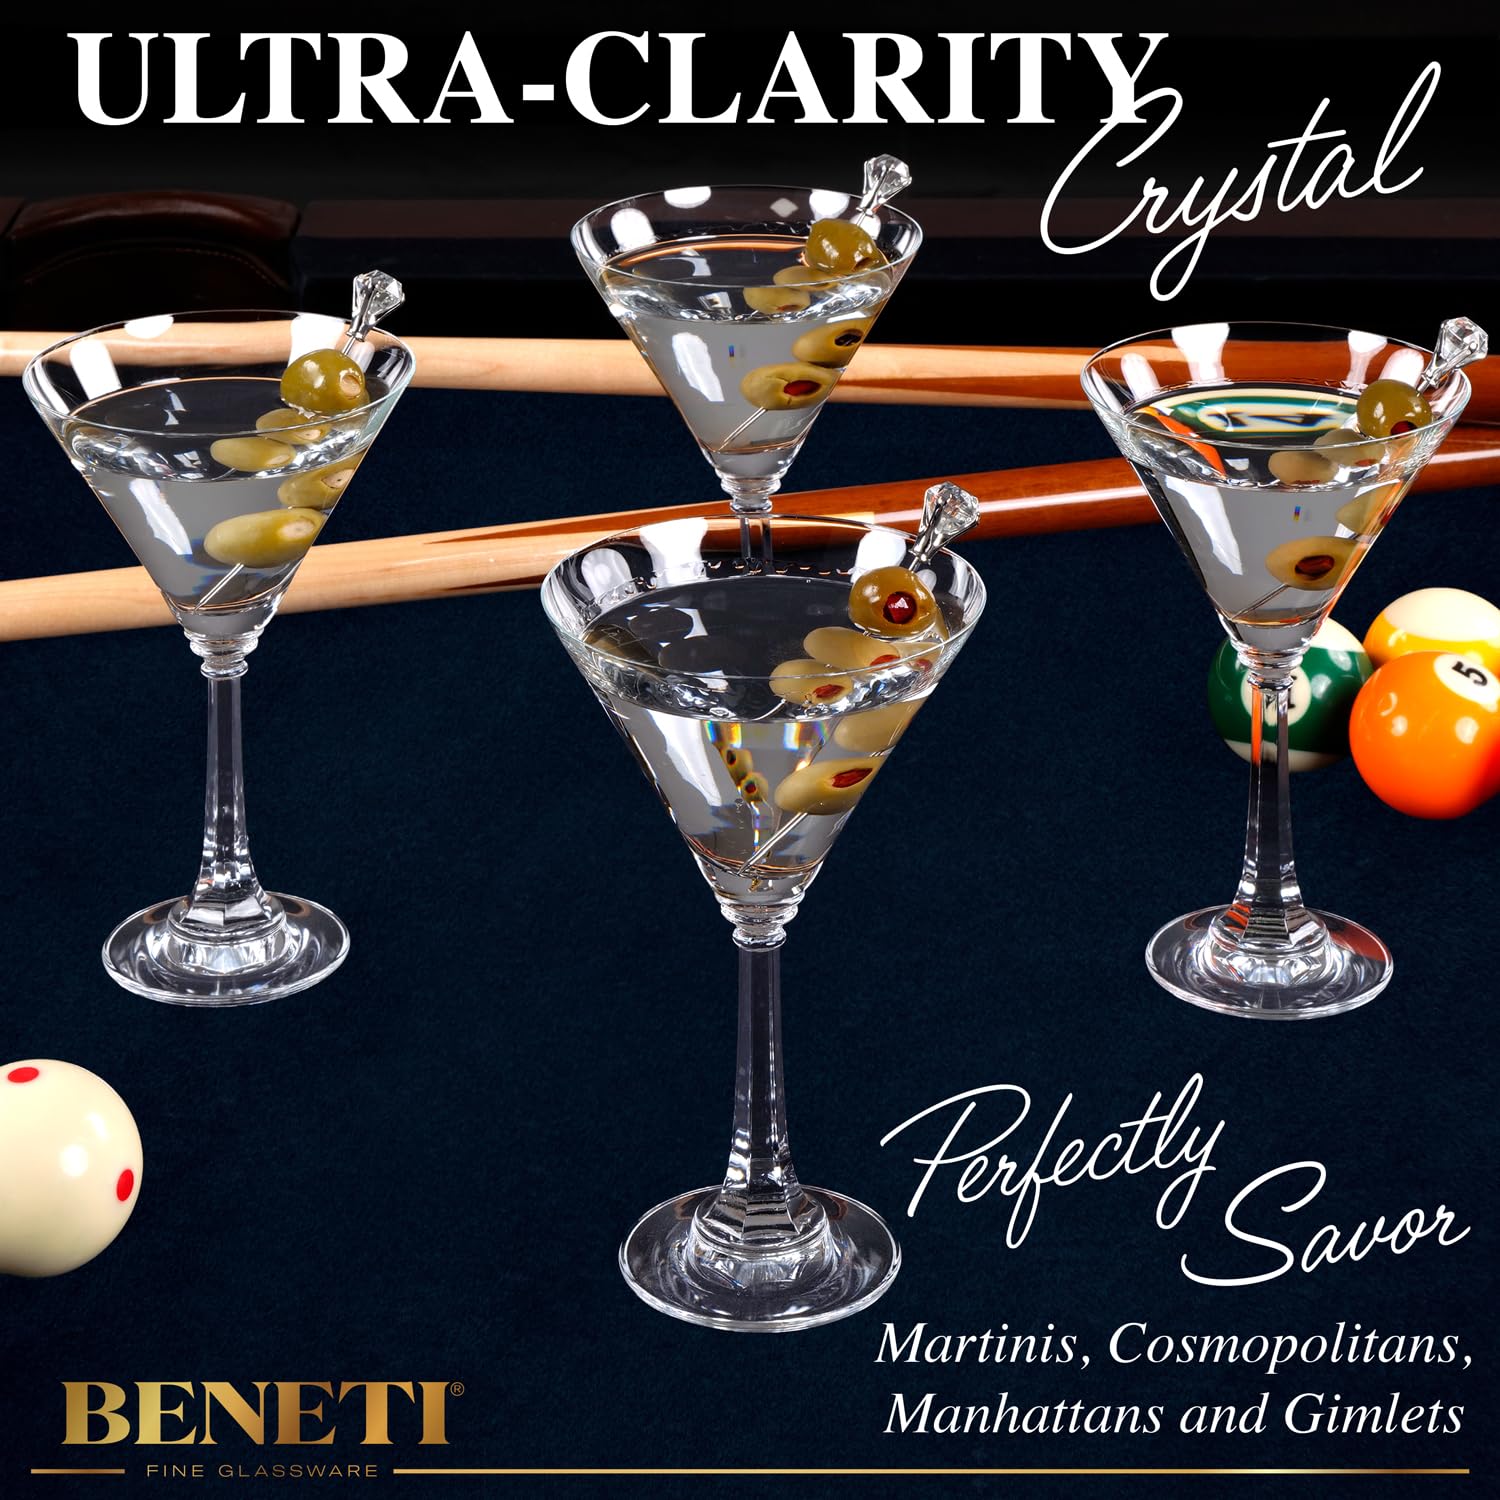 BENETI Tall Martini Glasses Set of 4 | Made in Europe | 11oz Long Stem Crystal Cocktail Bar Glasses | Perfect Wedding, Christmas, Holiday, or Birthday Gift for Men & Women of All Ages  - Like New